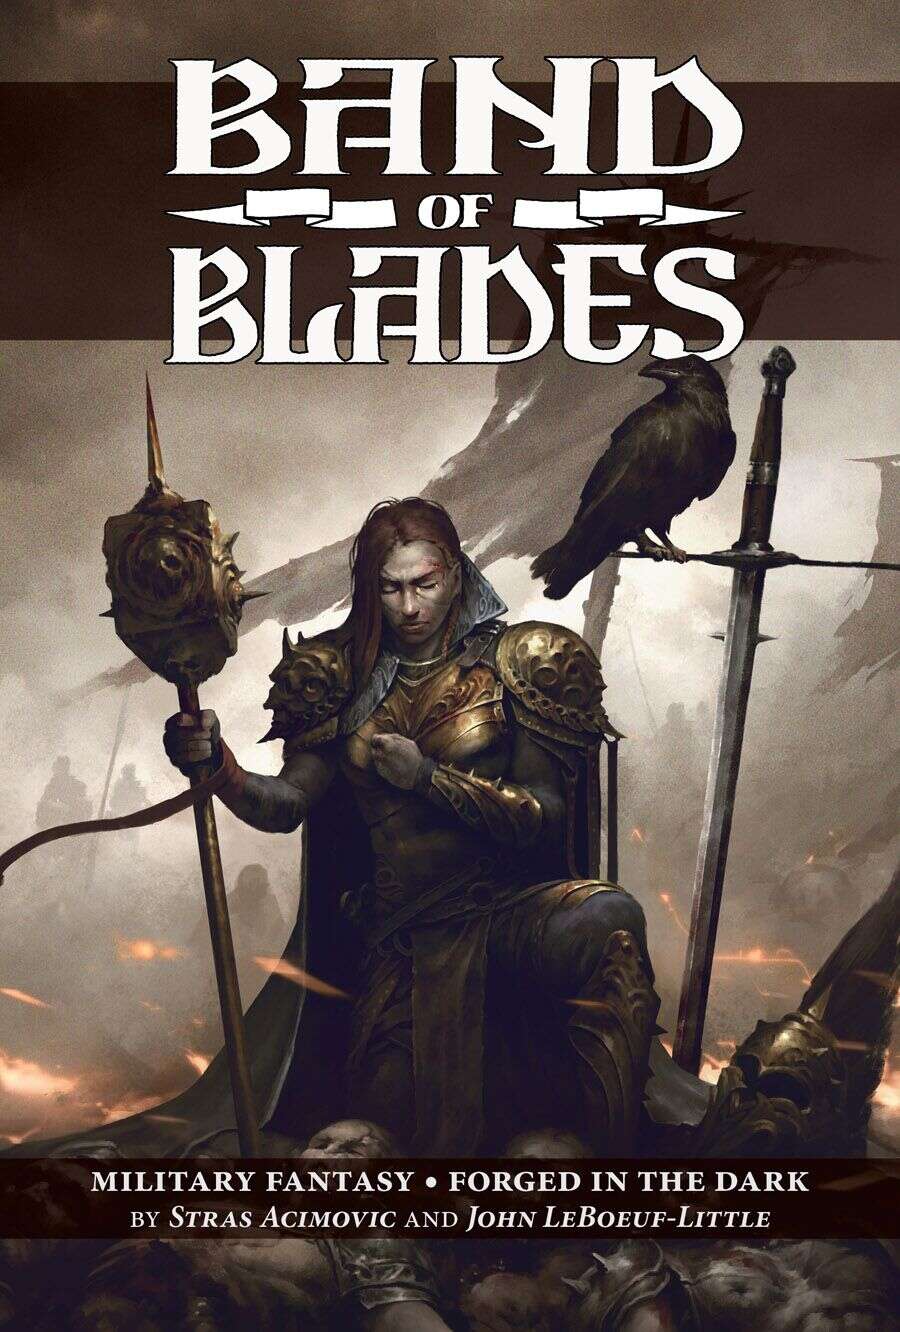 Band of Blades - Bards & Cards